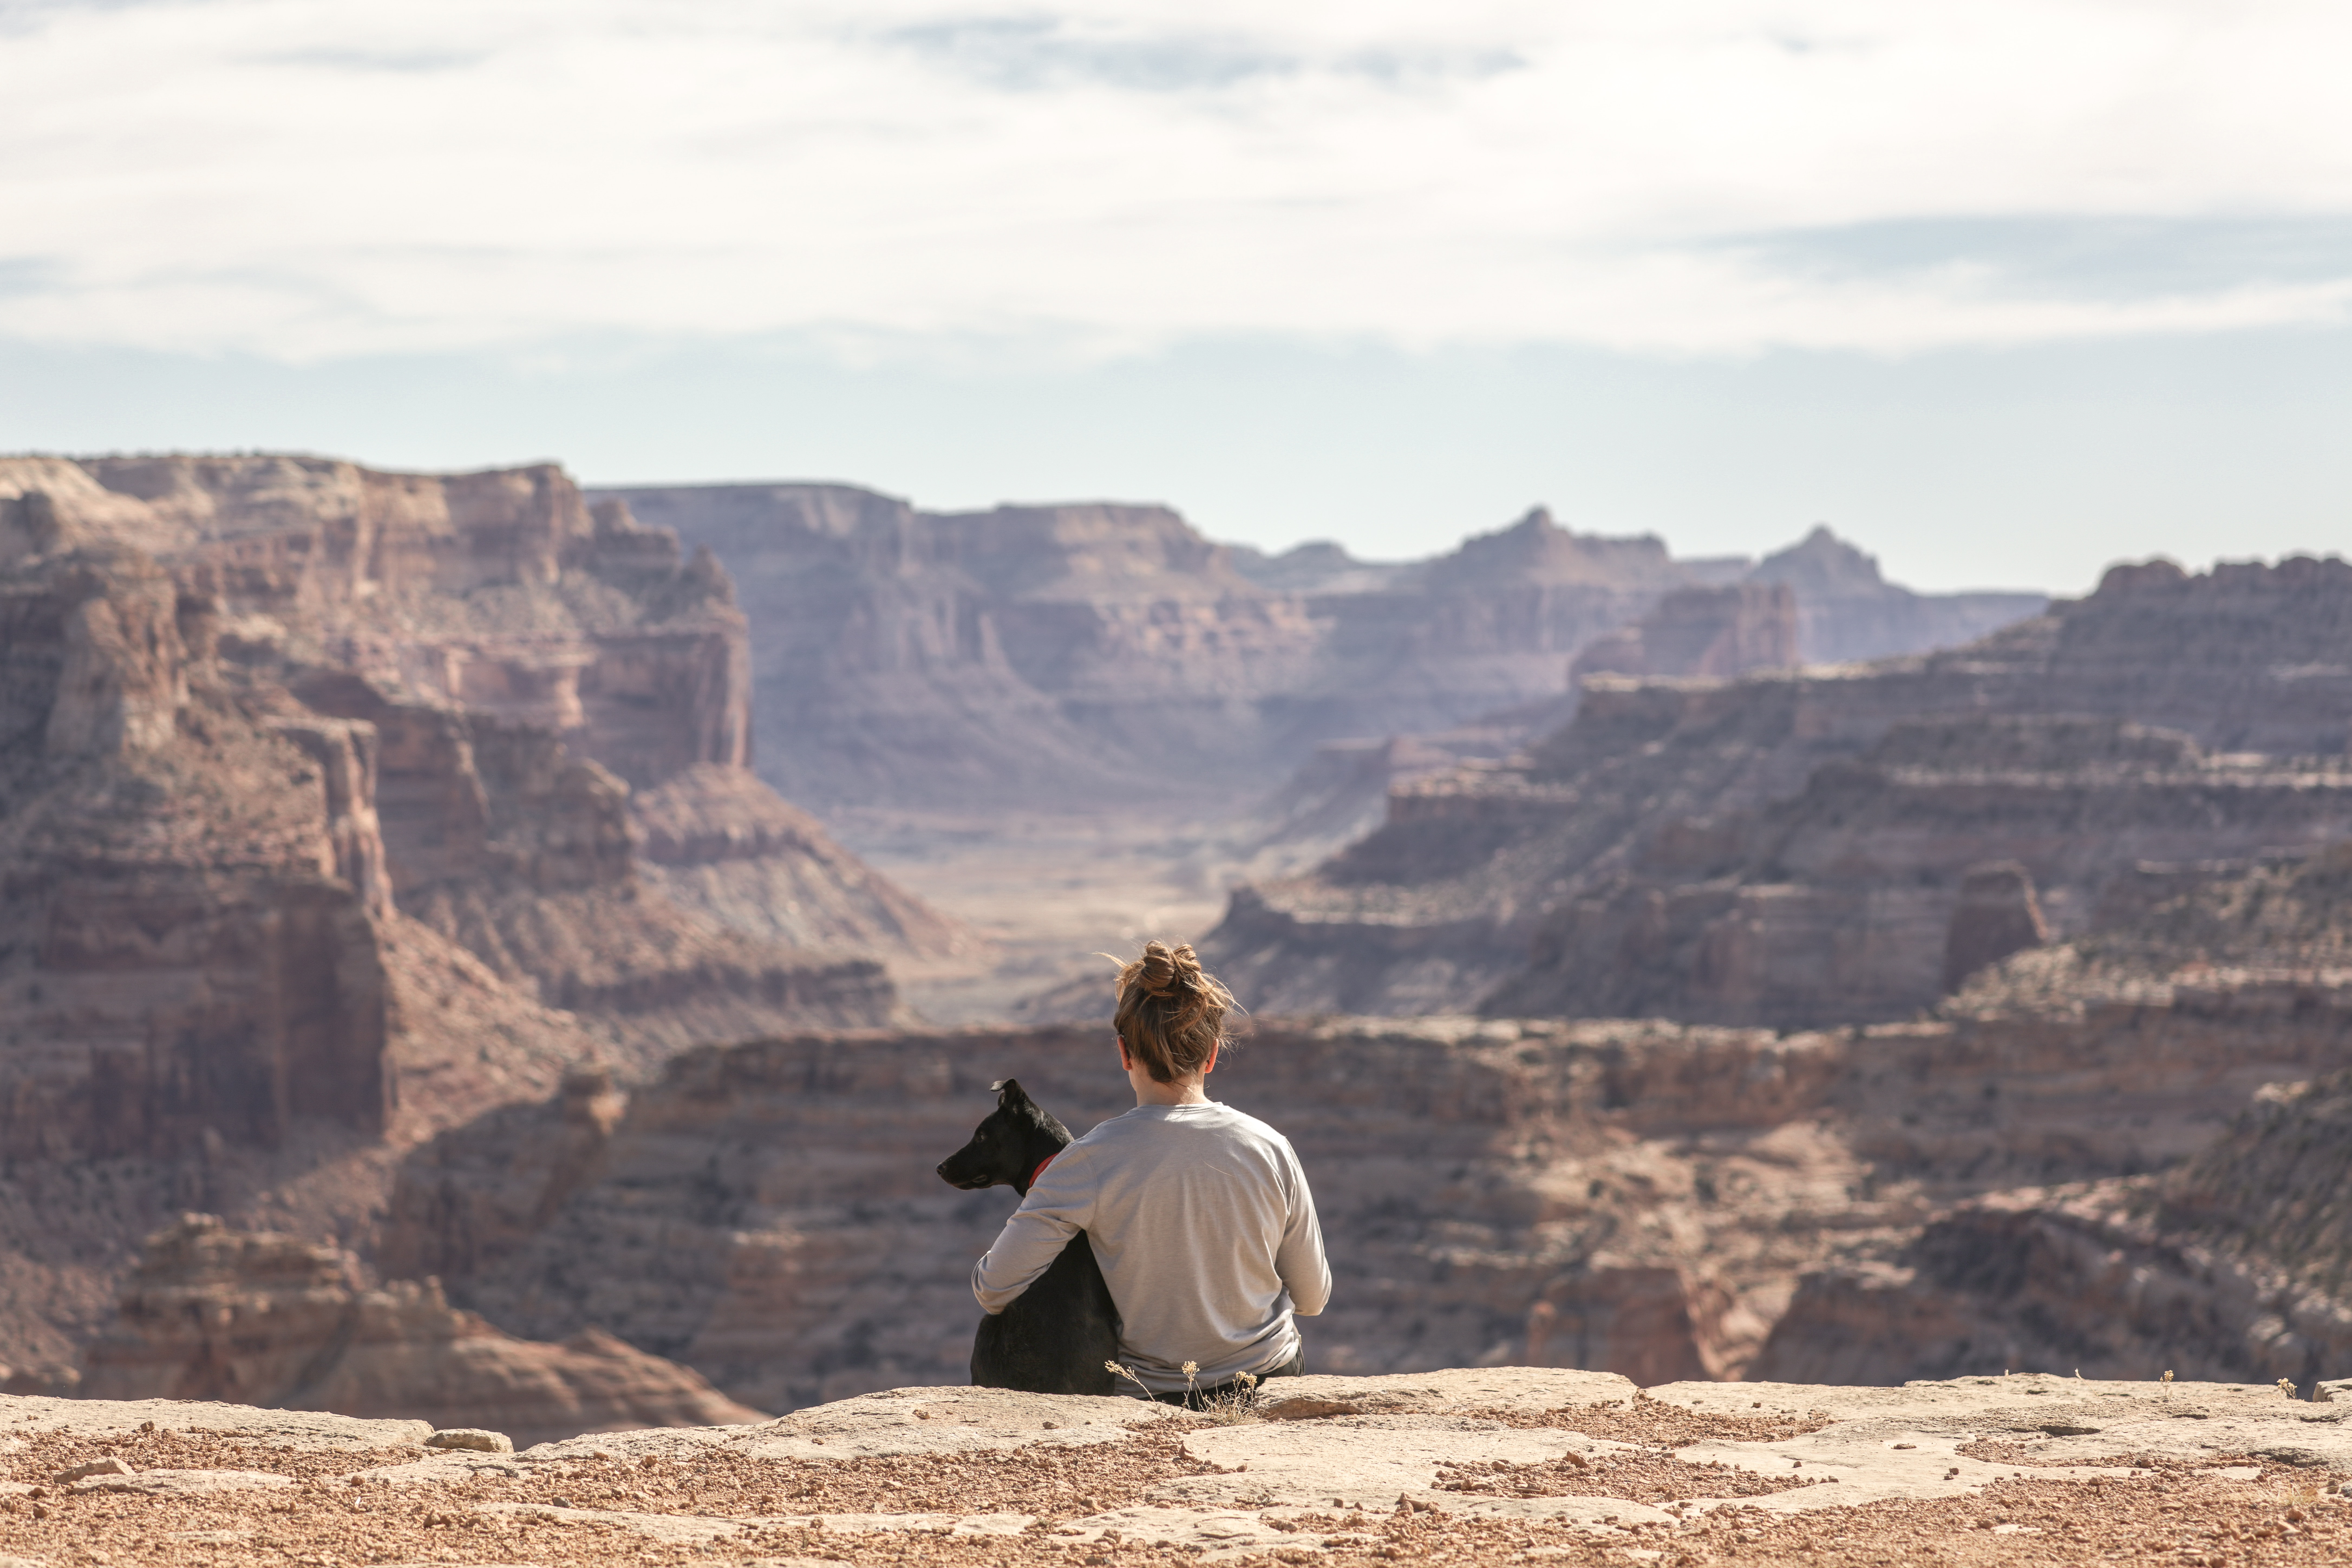 Dog and its owner sitting over a cliff overlooking a canyon.